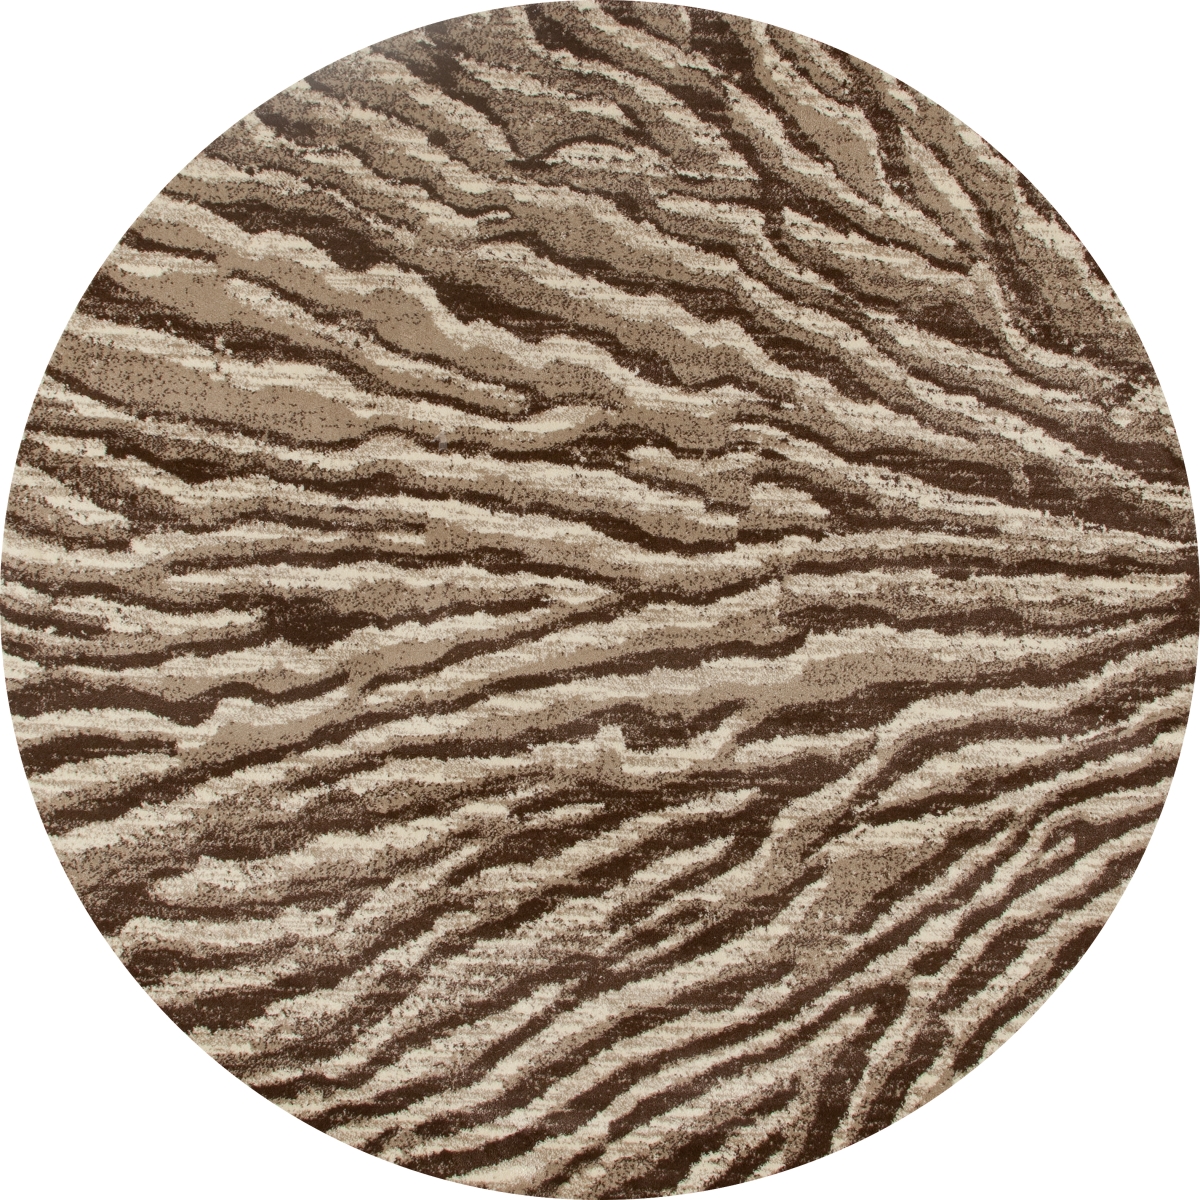 26075 5 Ft. Troy Collection Ripple Woven Round Area Rug, Beige